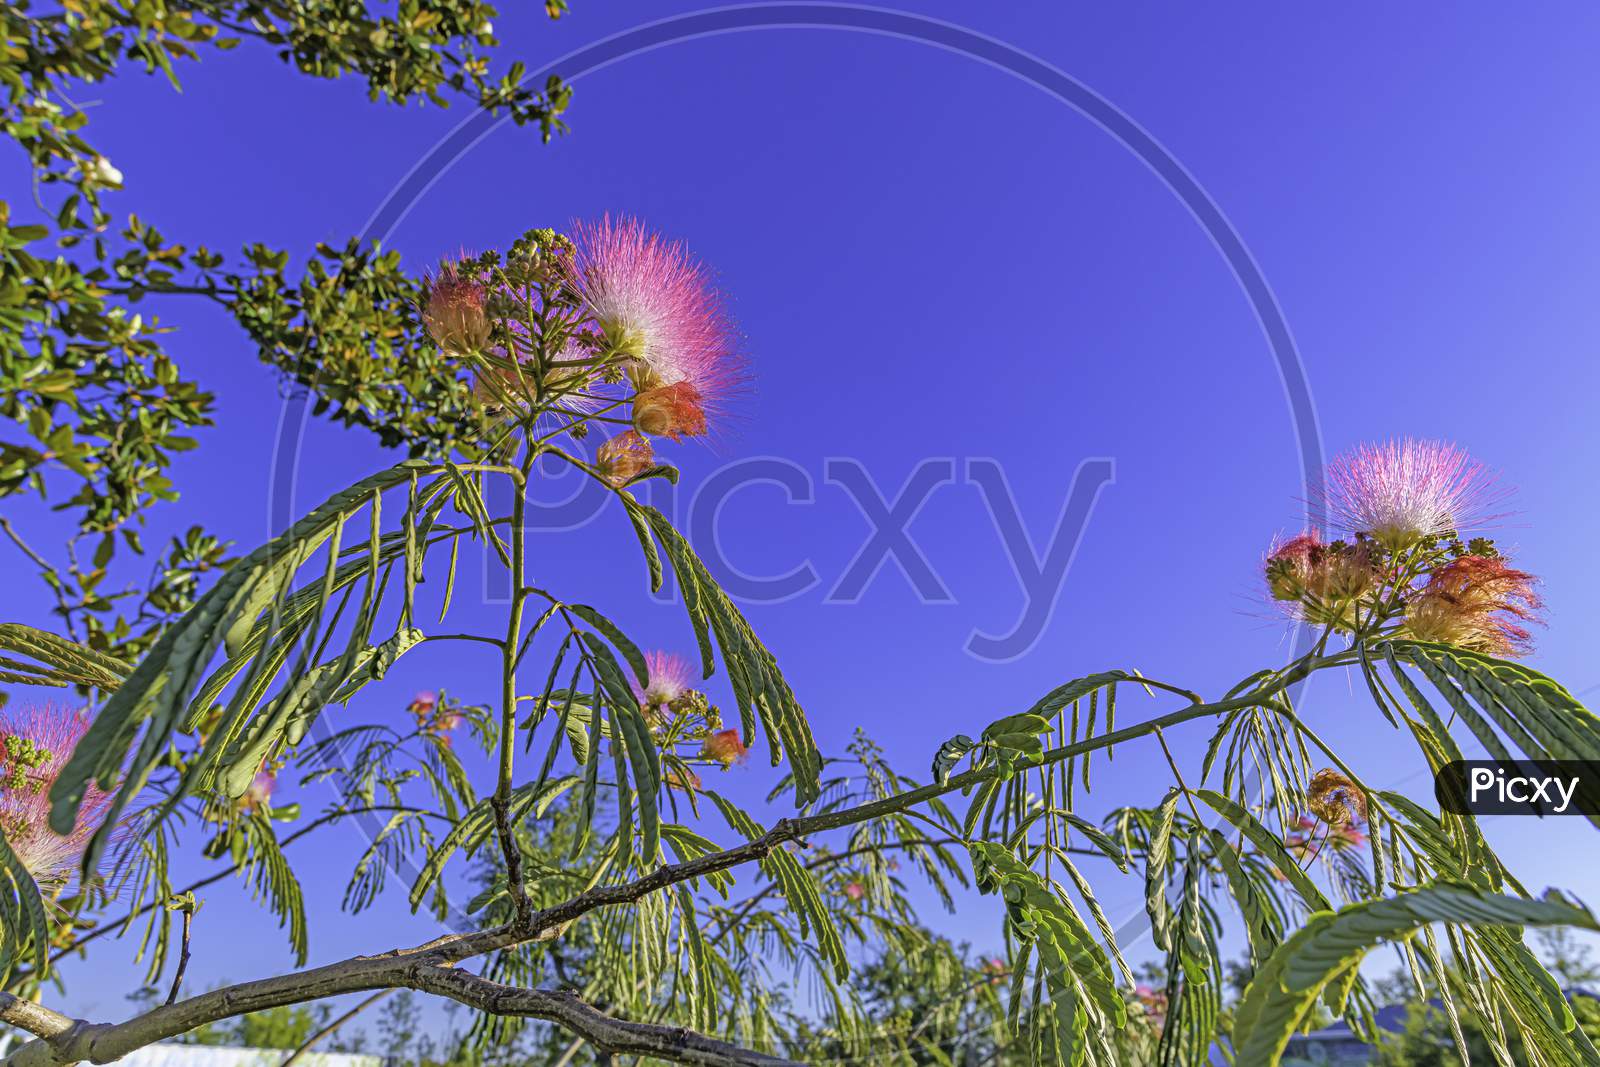 2020 Springtime Wideangle Macro Of Mimosa Branch And Flowers